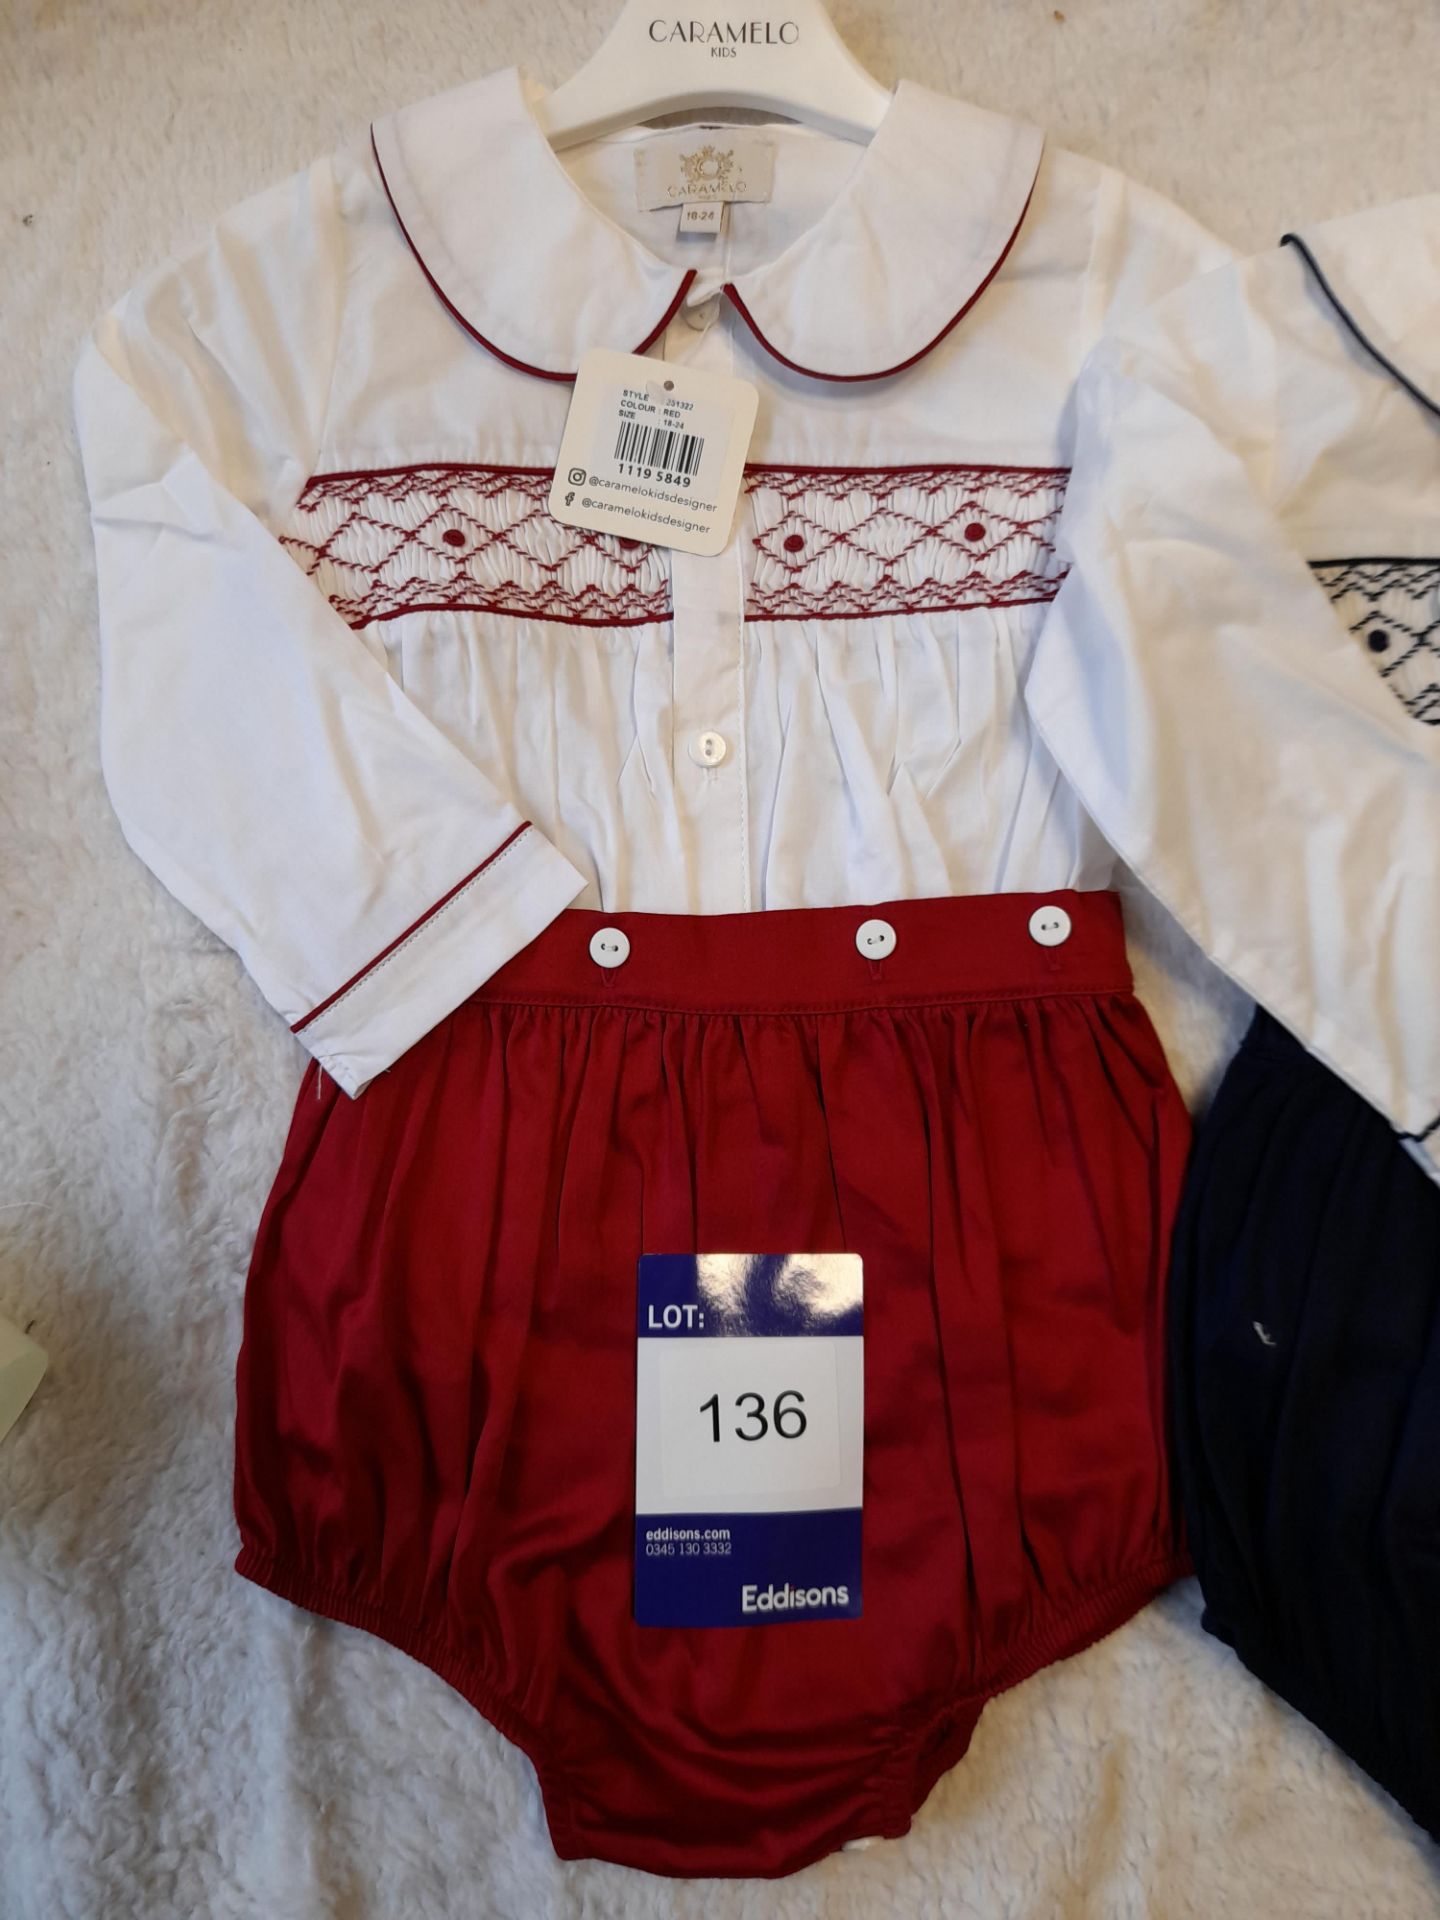 2 x Caramelo Kids Shirt/ Romper, Navy & Red, both - Image 4 of 4